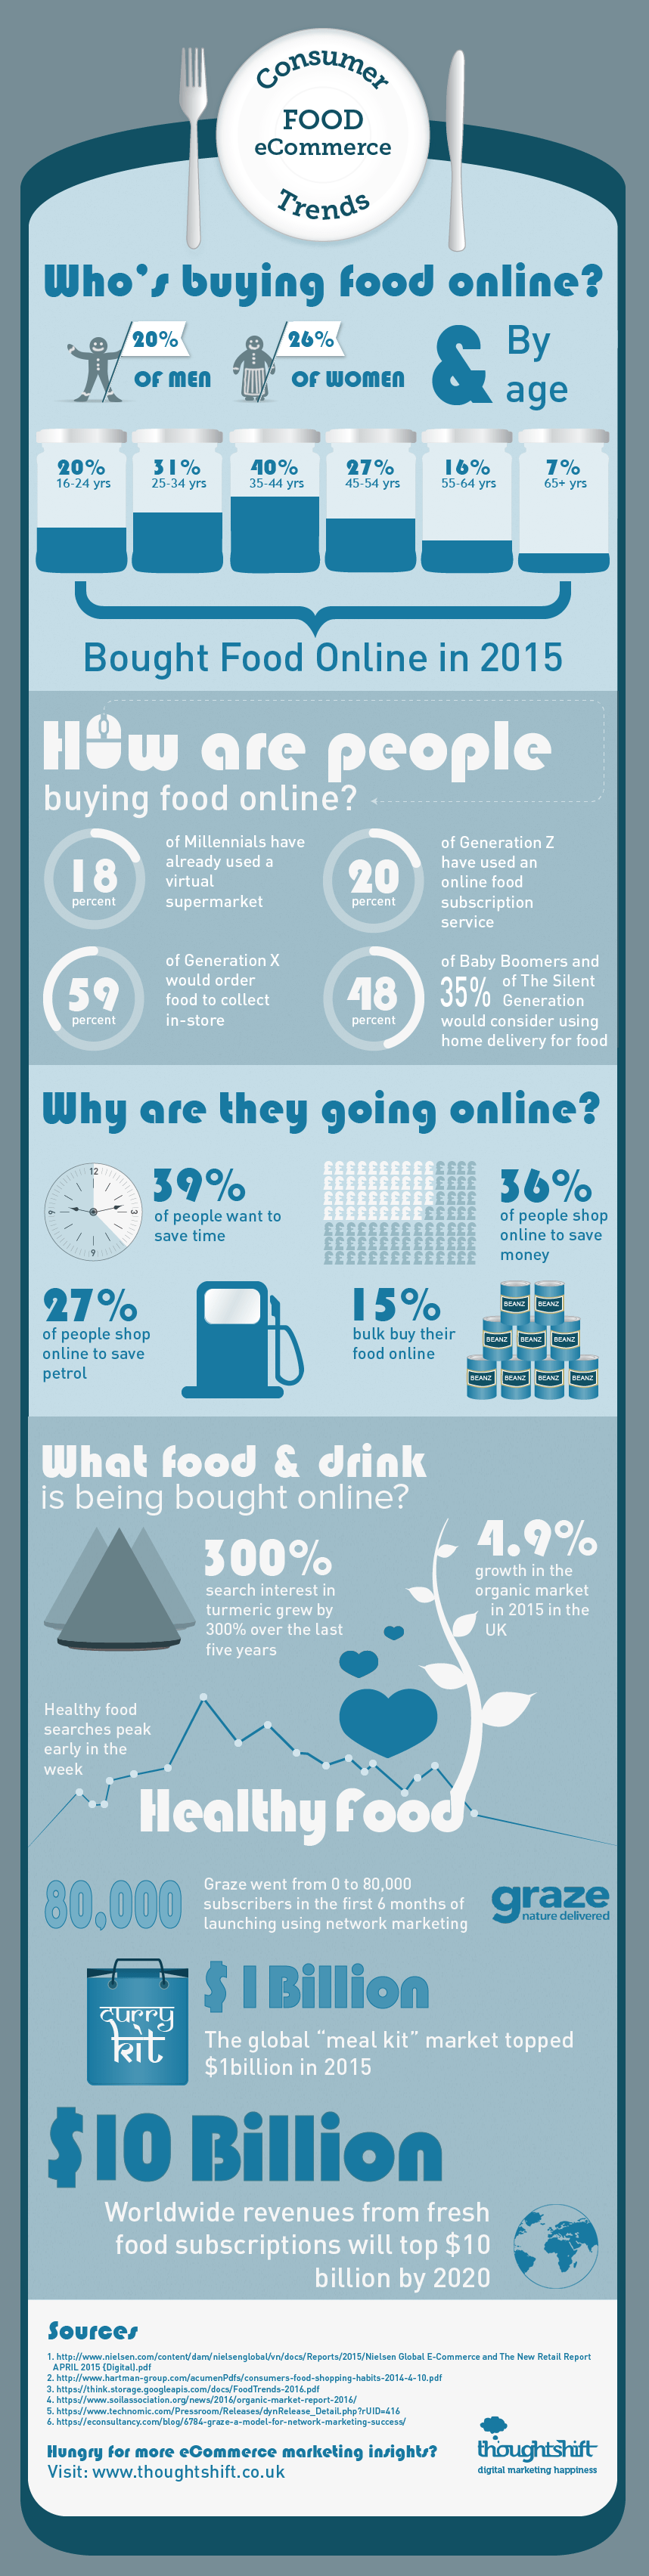 Consumer food ecommerce trends Infographic